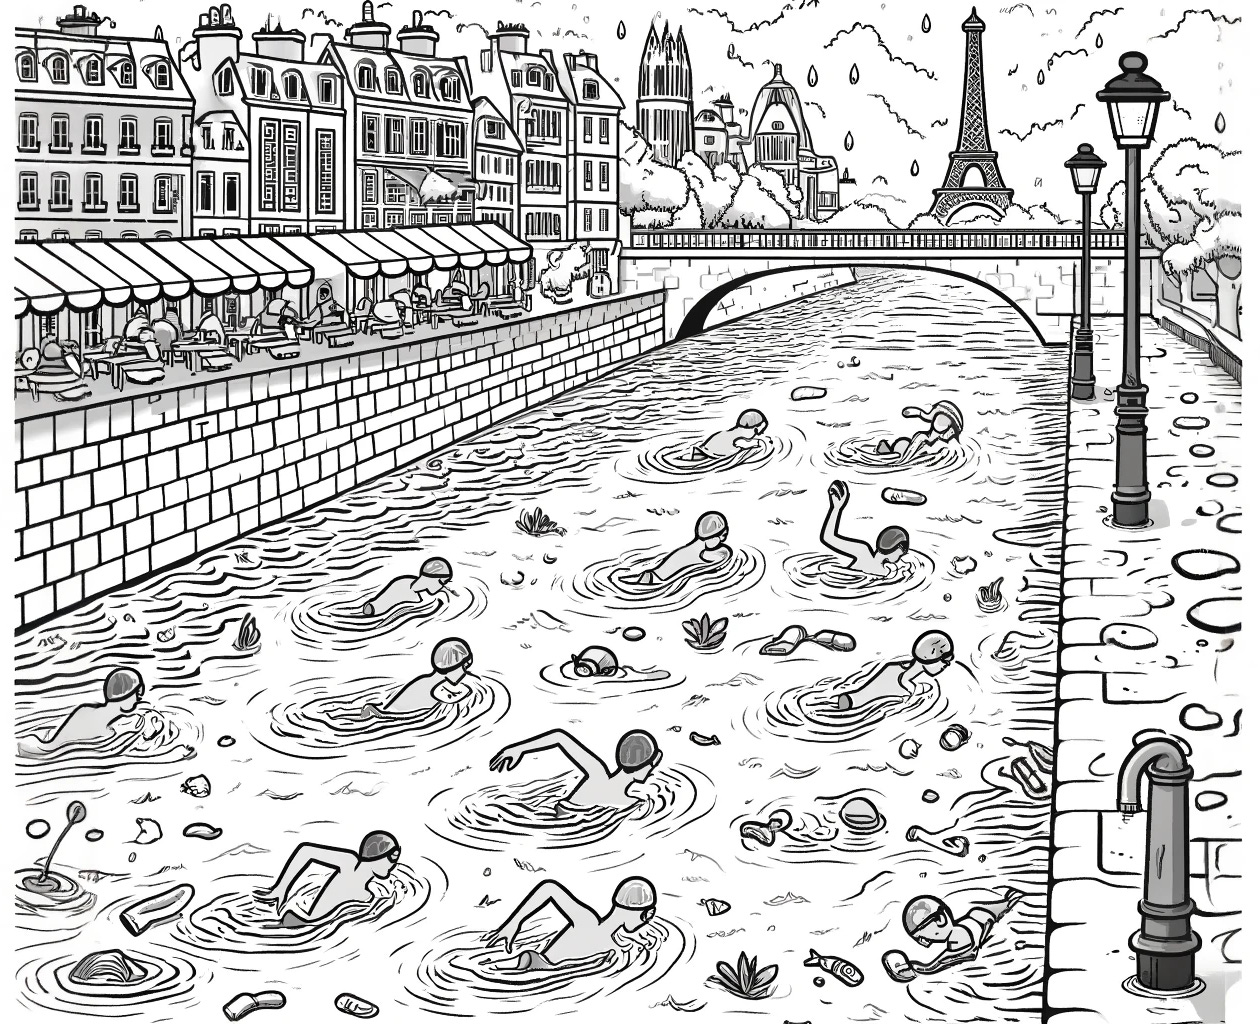 Swim in the Seine at your own risk!